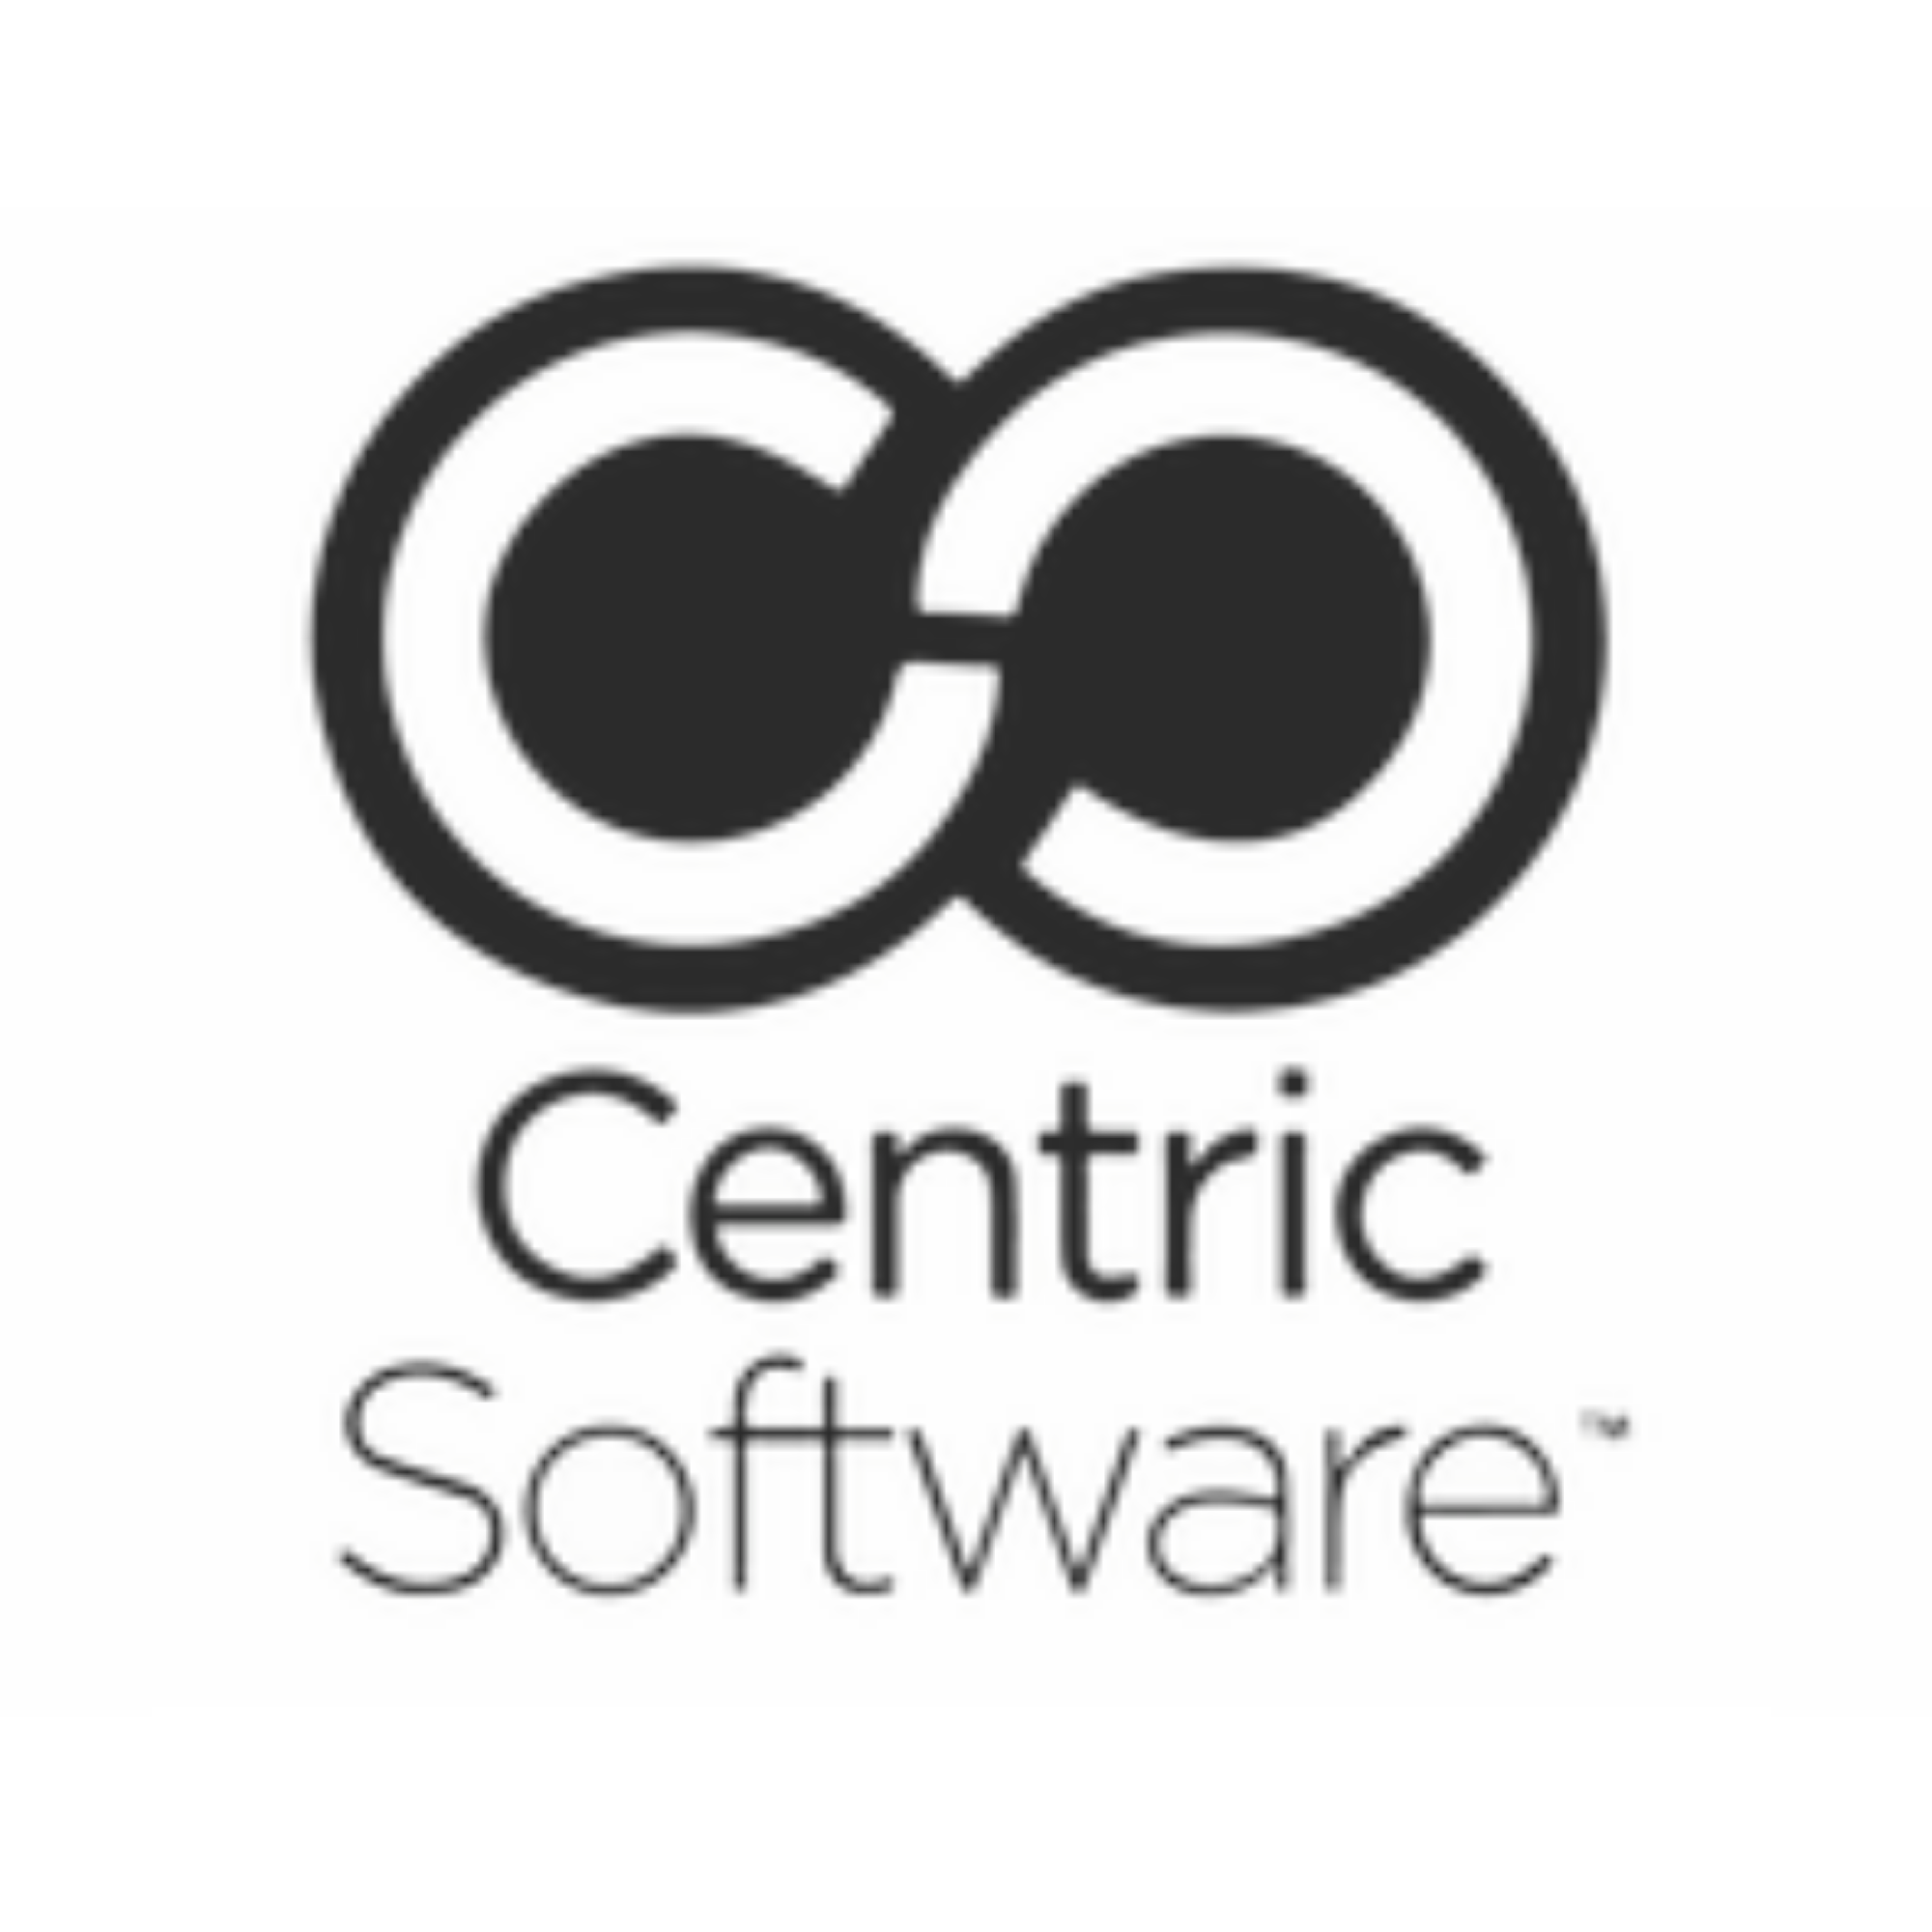 Centric8 by Centric Software